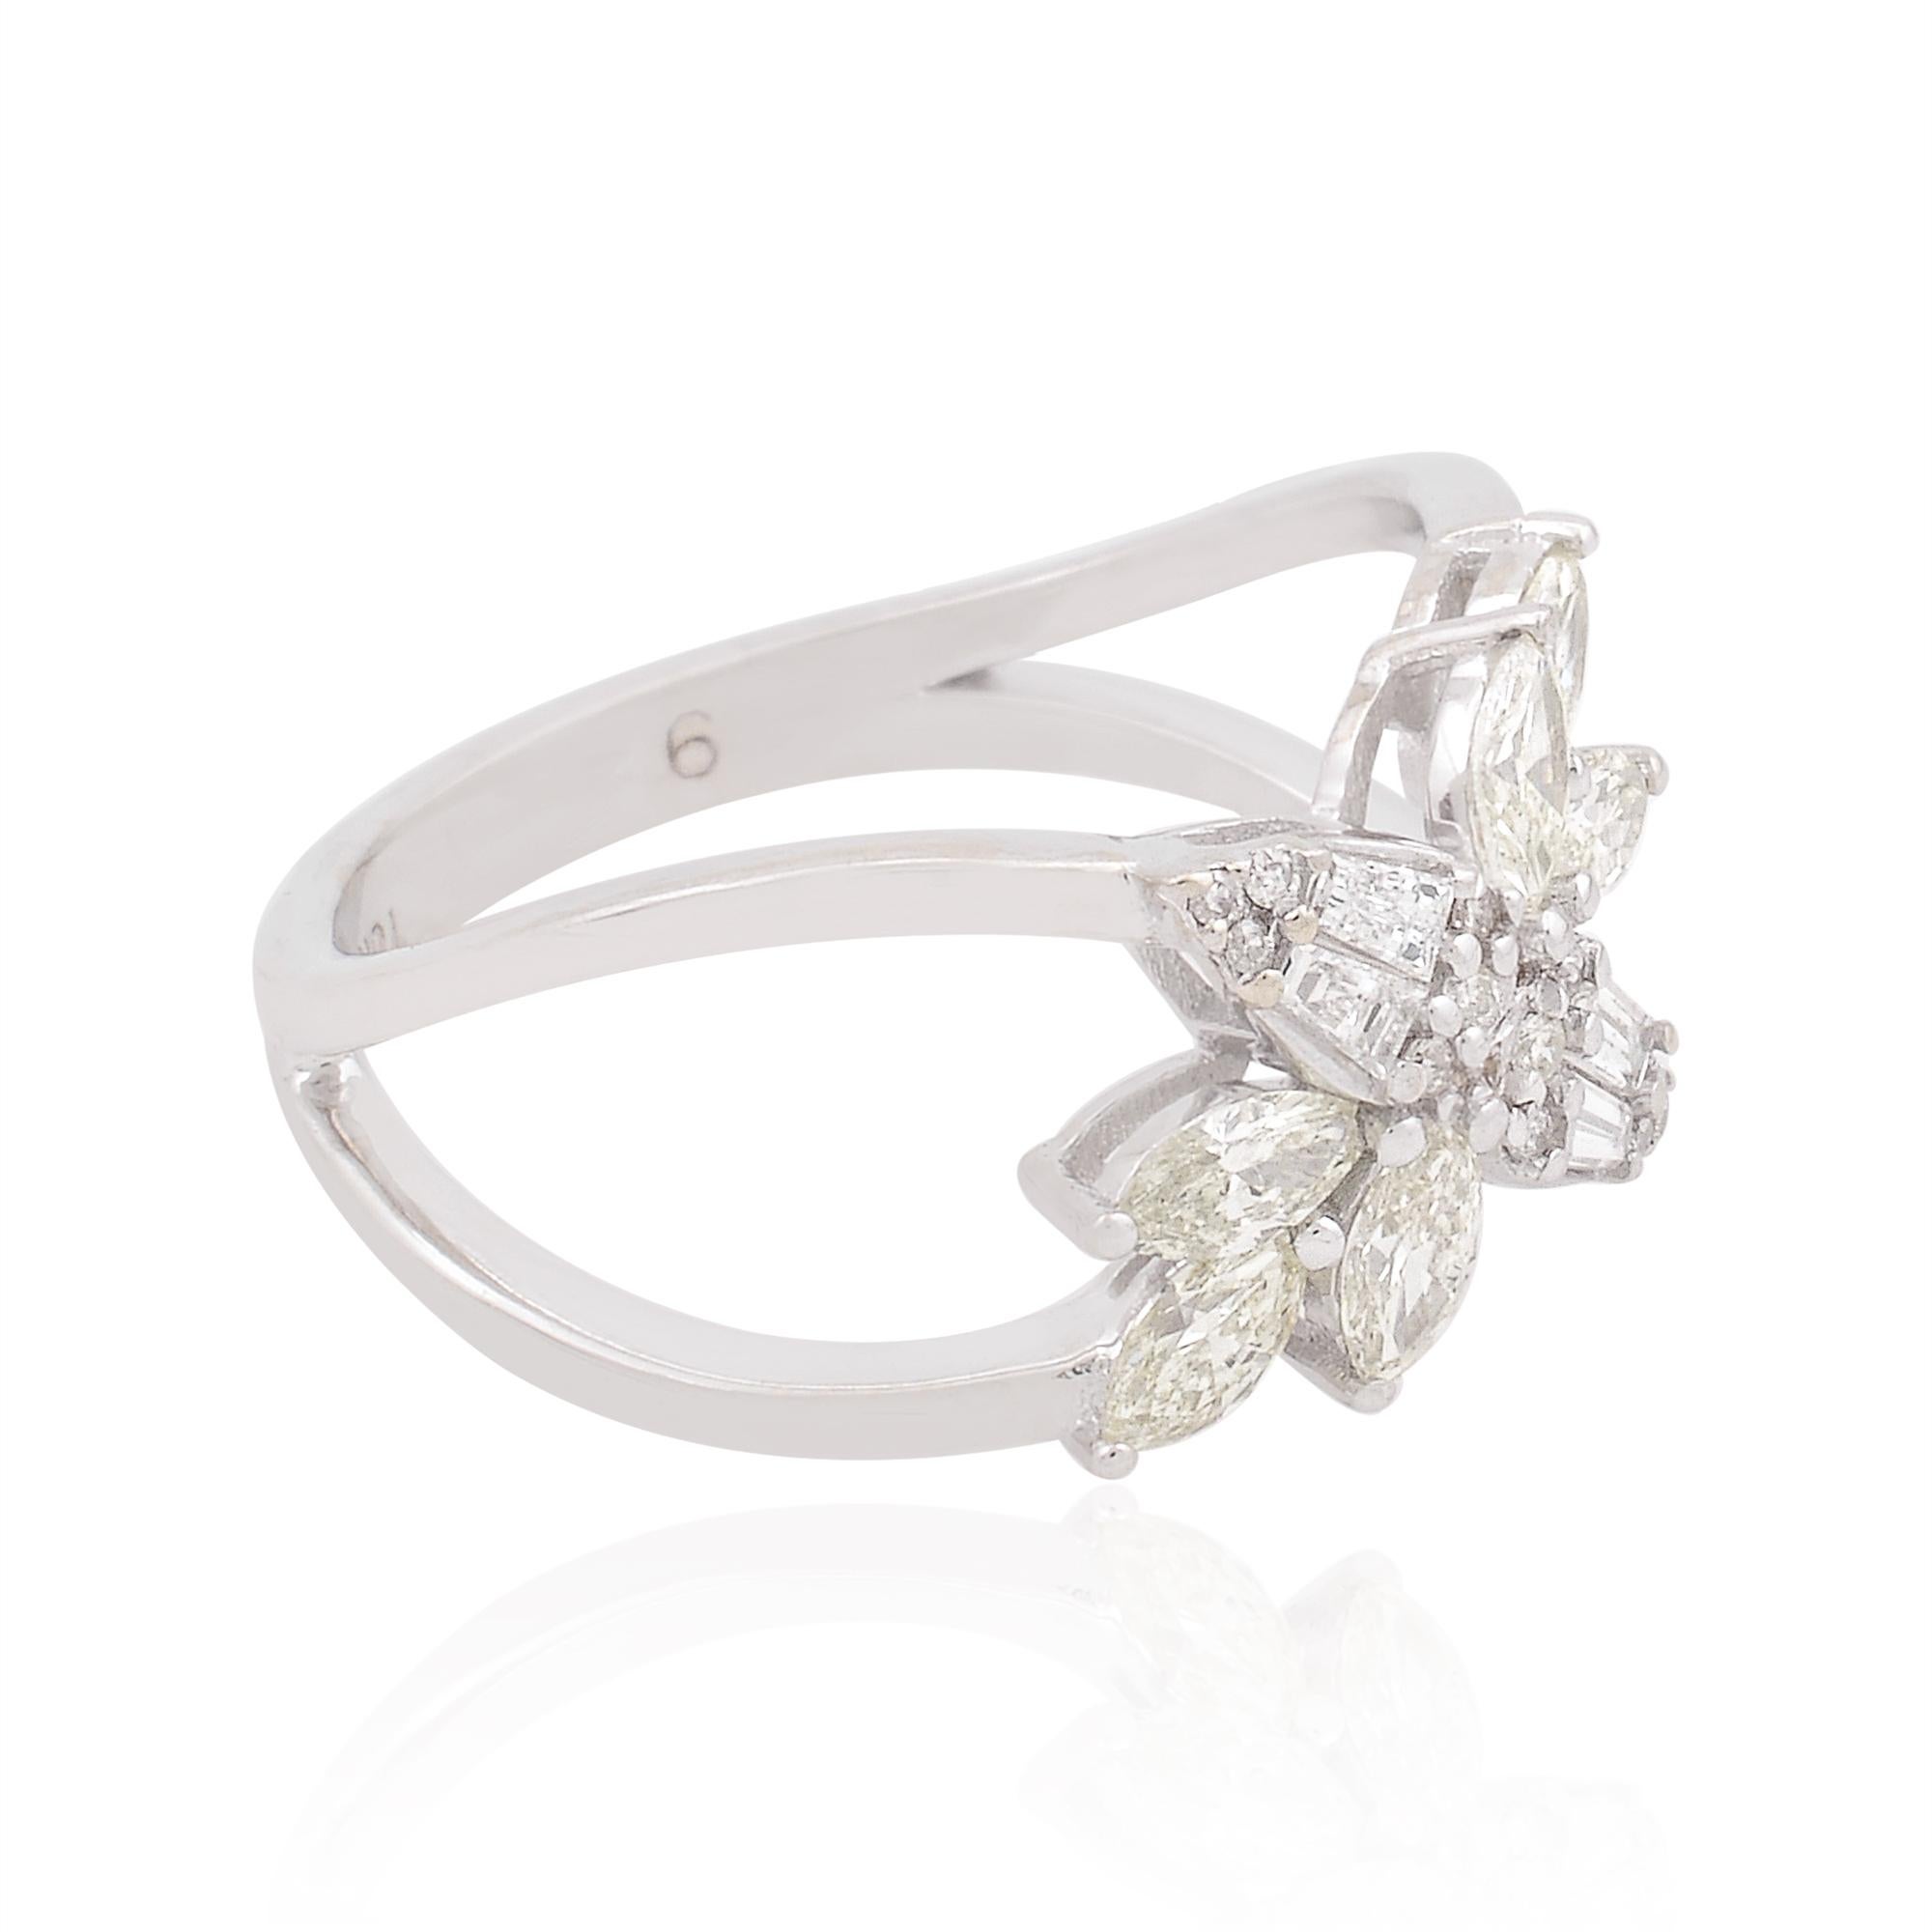 A cocktail ring featuring marquise and baguette diamonds in 18 karat white gold is a statement piece of handmade fine jewelry. The ring typically showcases a combination of marquise-shaped and baguette-shaped diamonds.

Item Code :- SER-21016
Gross